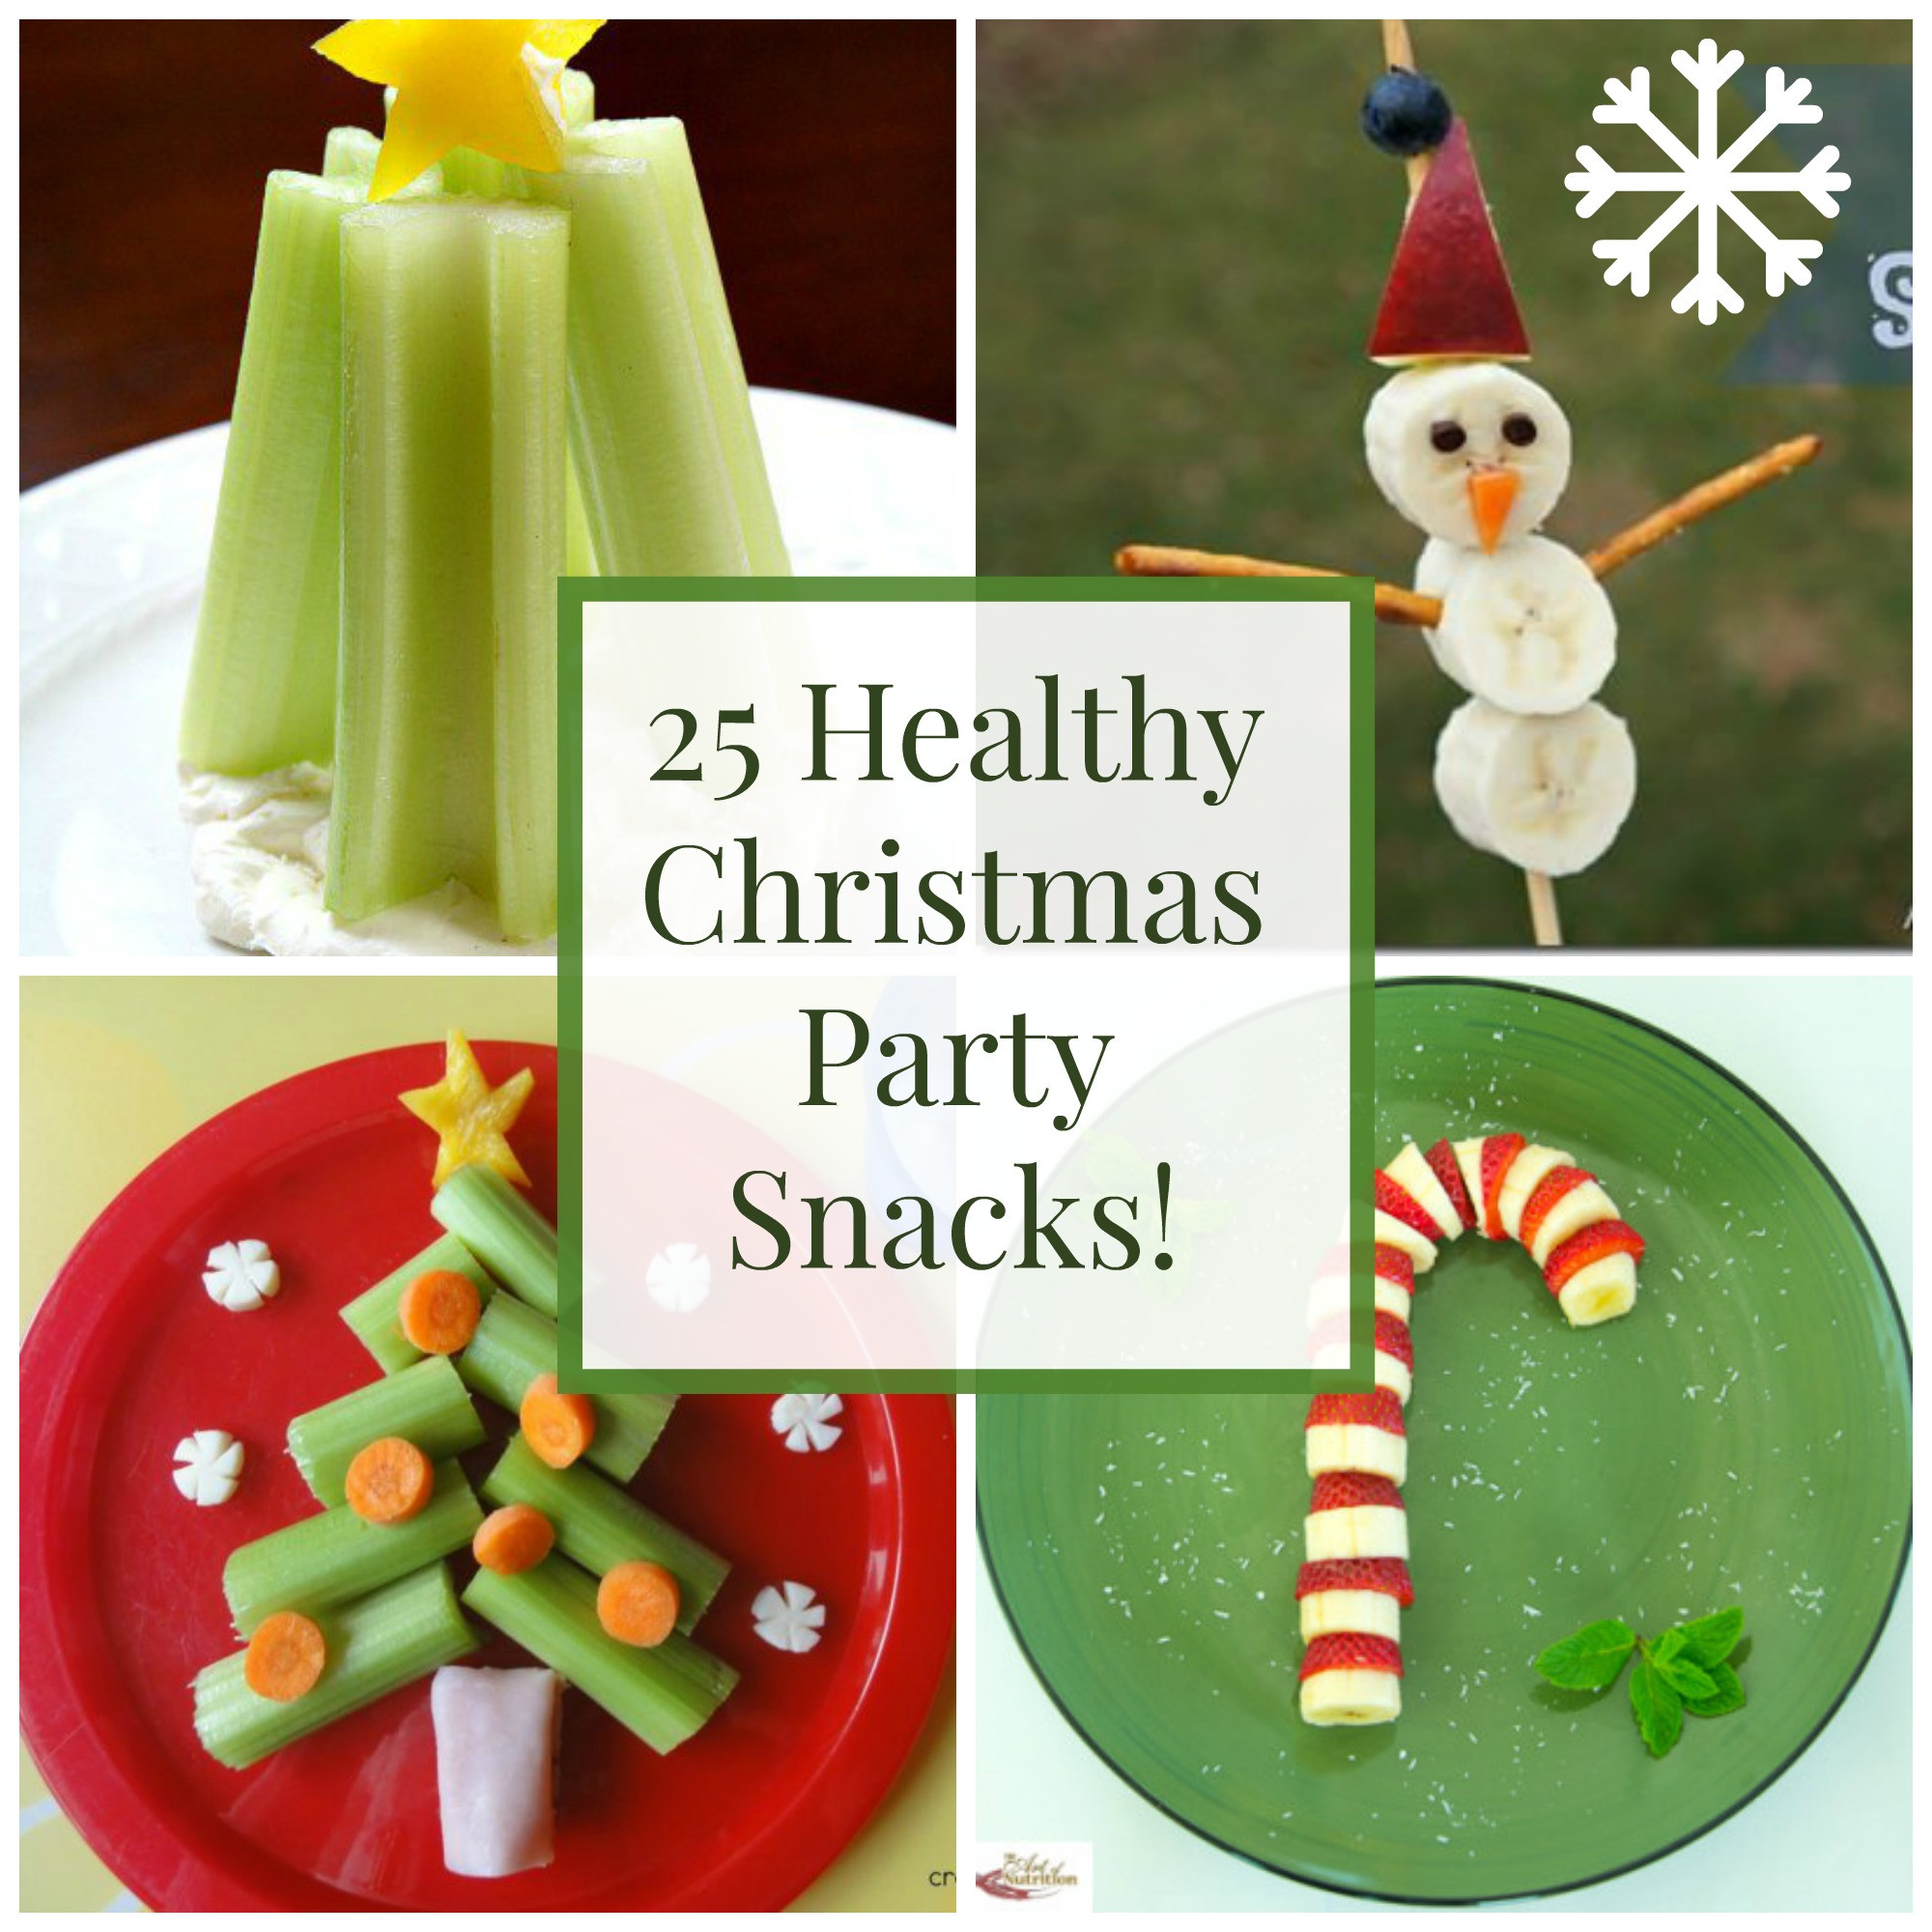 Kid Christmas Party Food Ideas
 25 Healthy Christmas Snacks and Party Foods